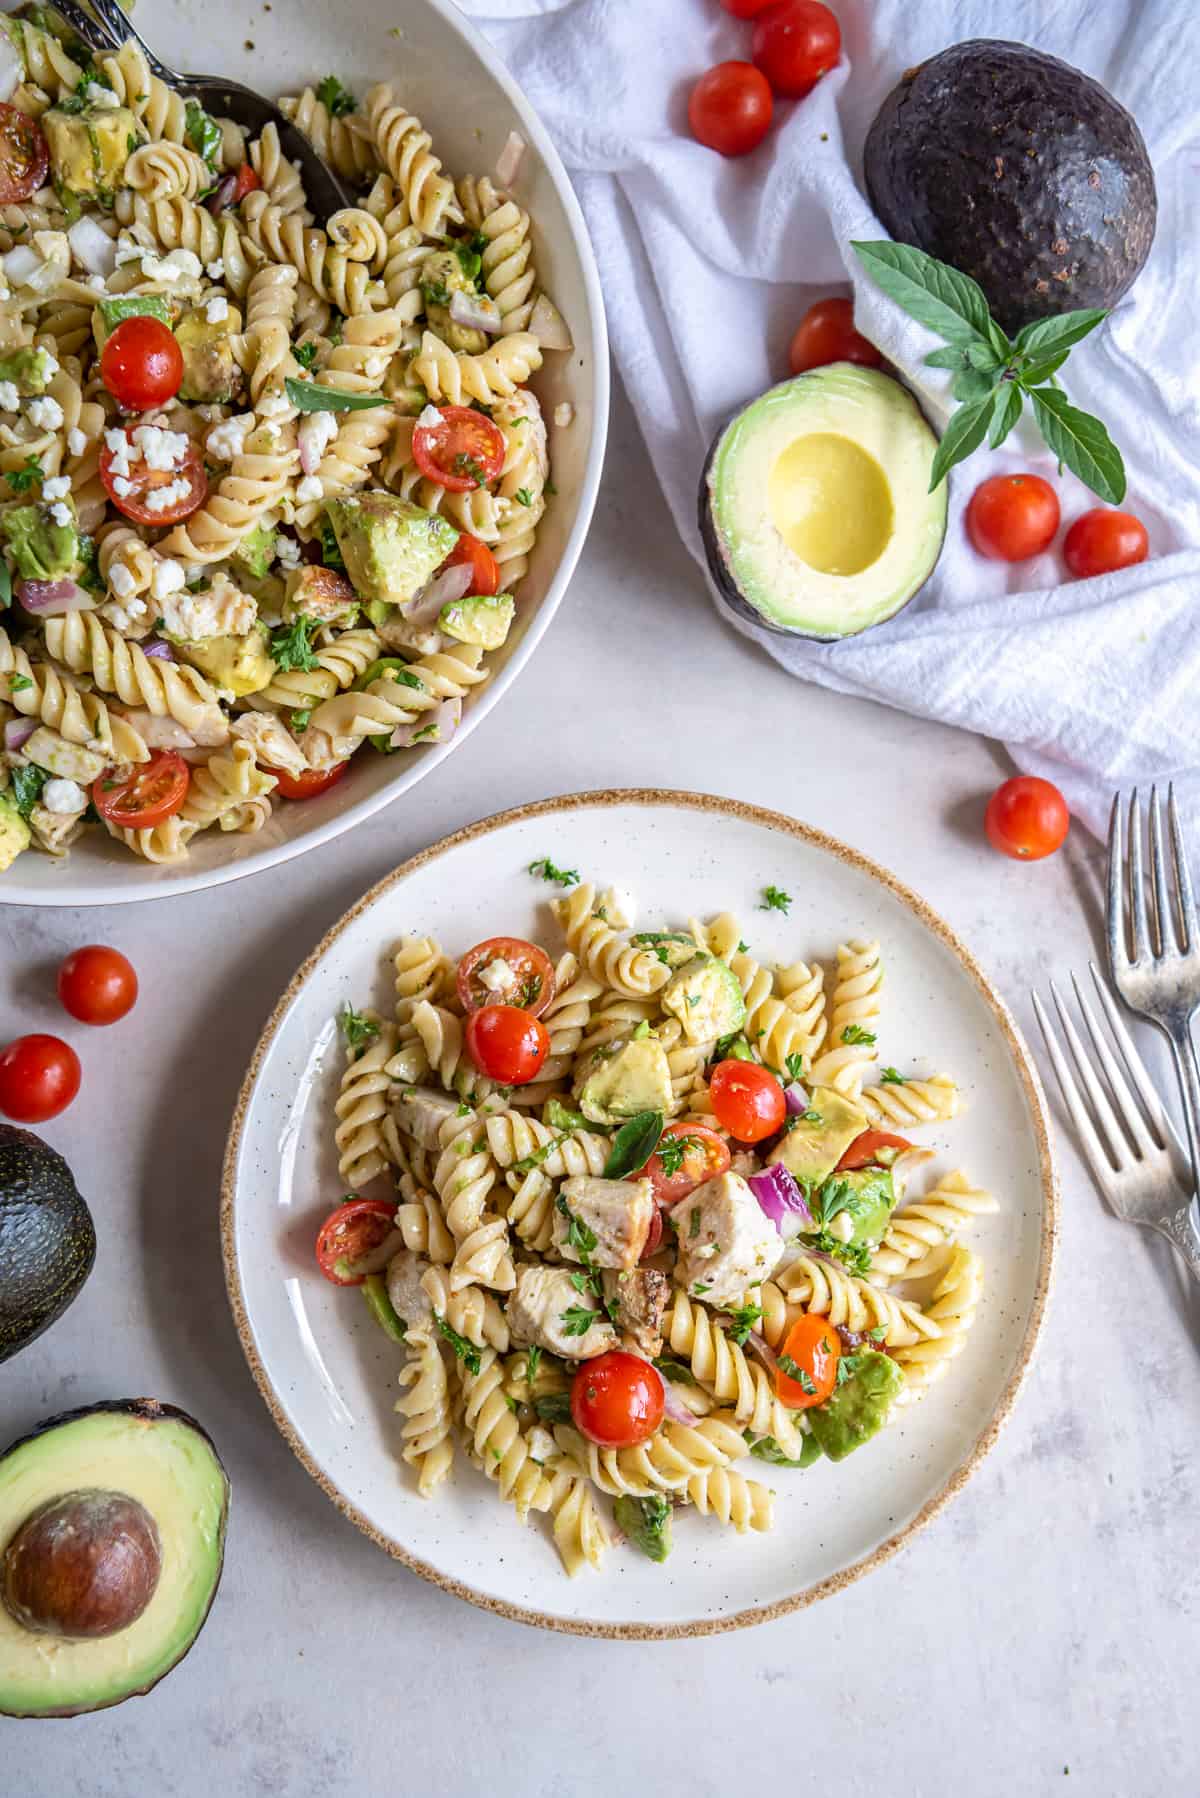 Chicken pasta salad in a serving bowl and on a plate next to avocados and cherry tomatoes.